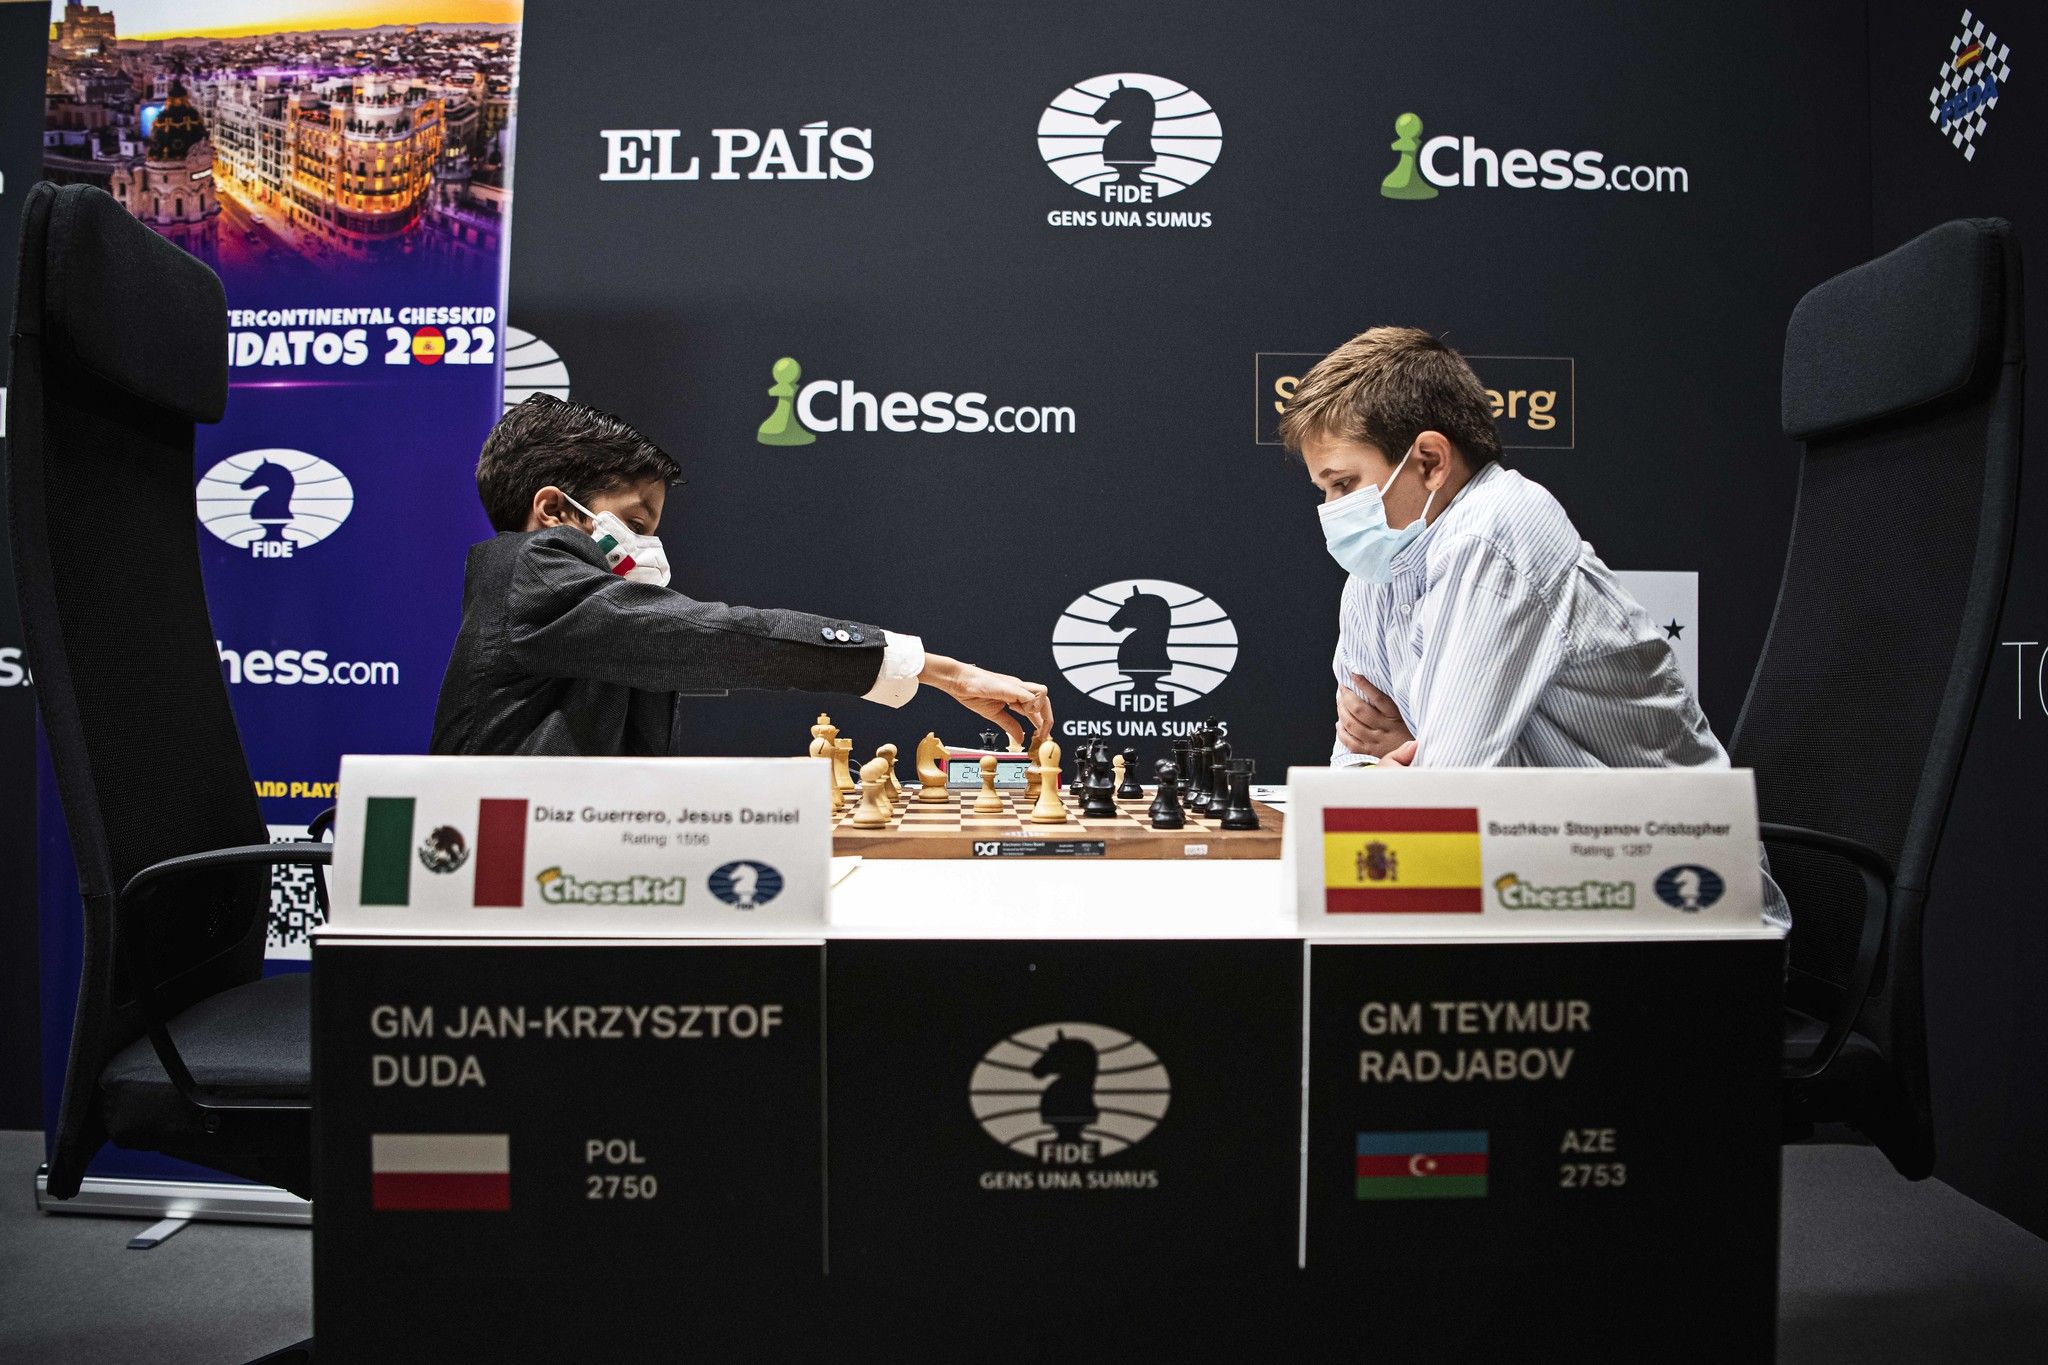 Two young chess players competing in the 2022 ChessKid Candidates Tournament in Madrid.